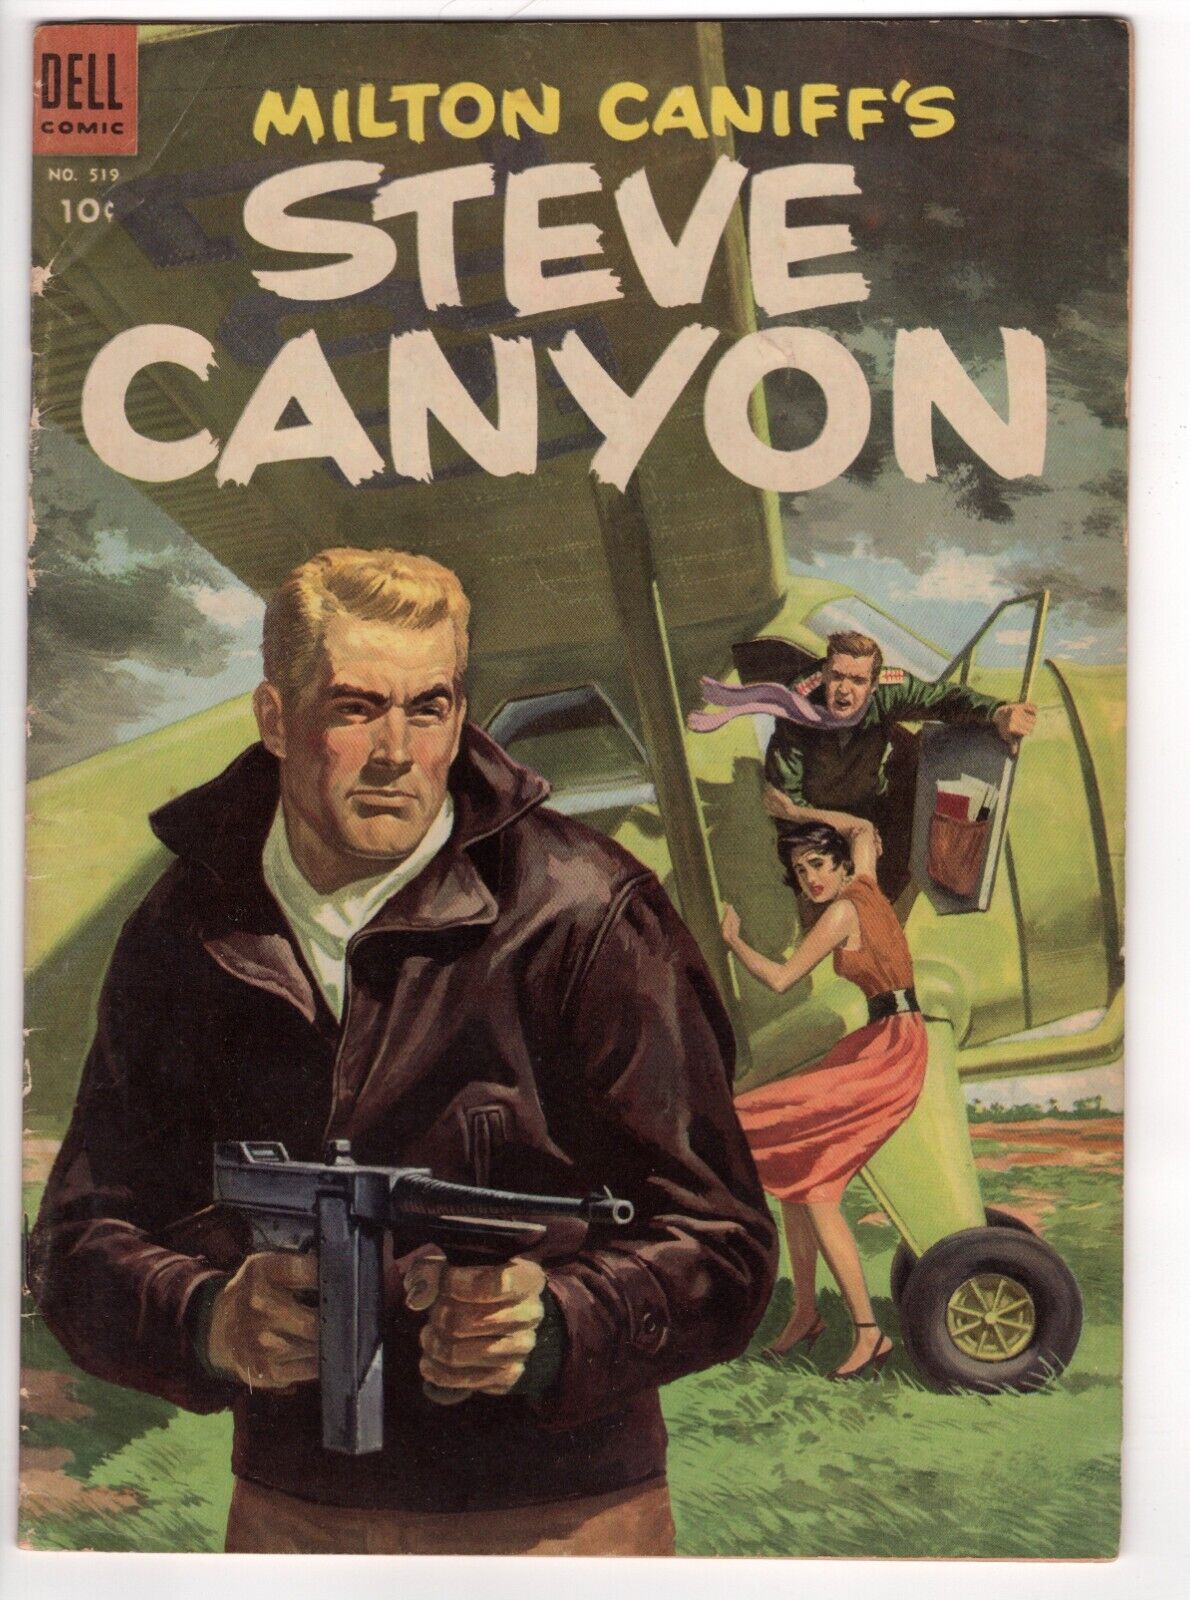 FOUR COLOR 519  Milton Caniff's STEVE CANYON  1953  G-VG  Dell  Overgard art